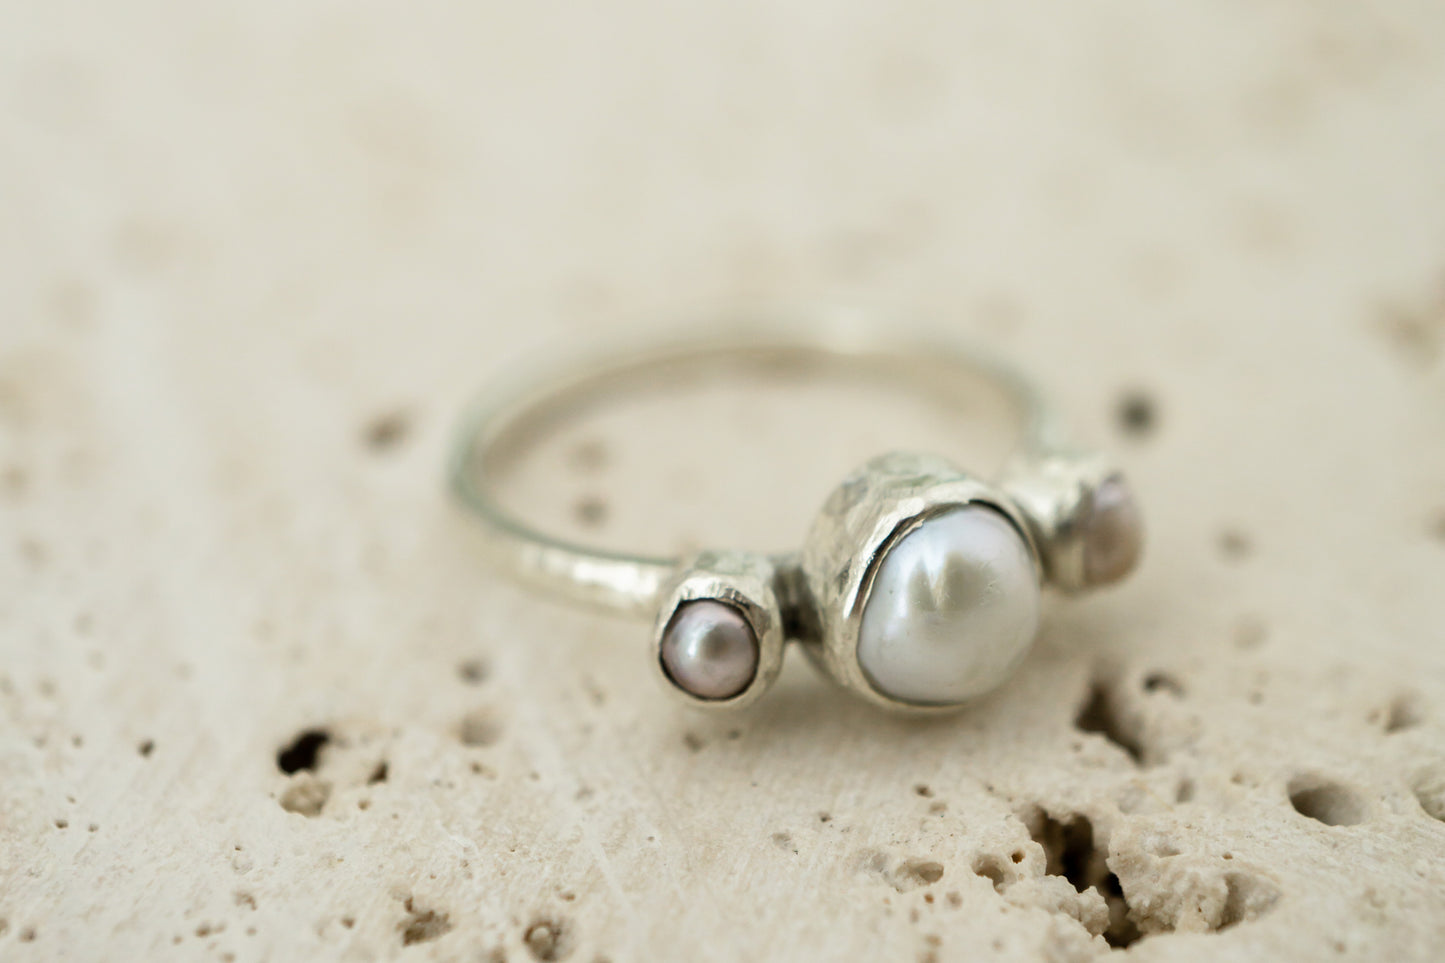 Pearl ring - 925 silver, size 8